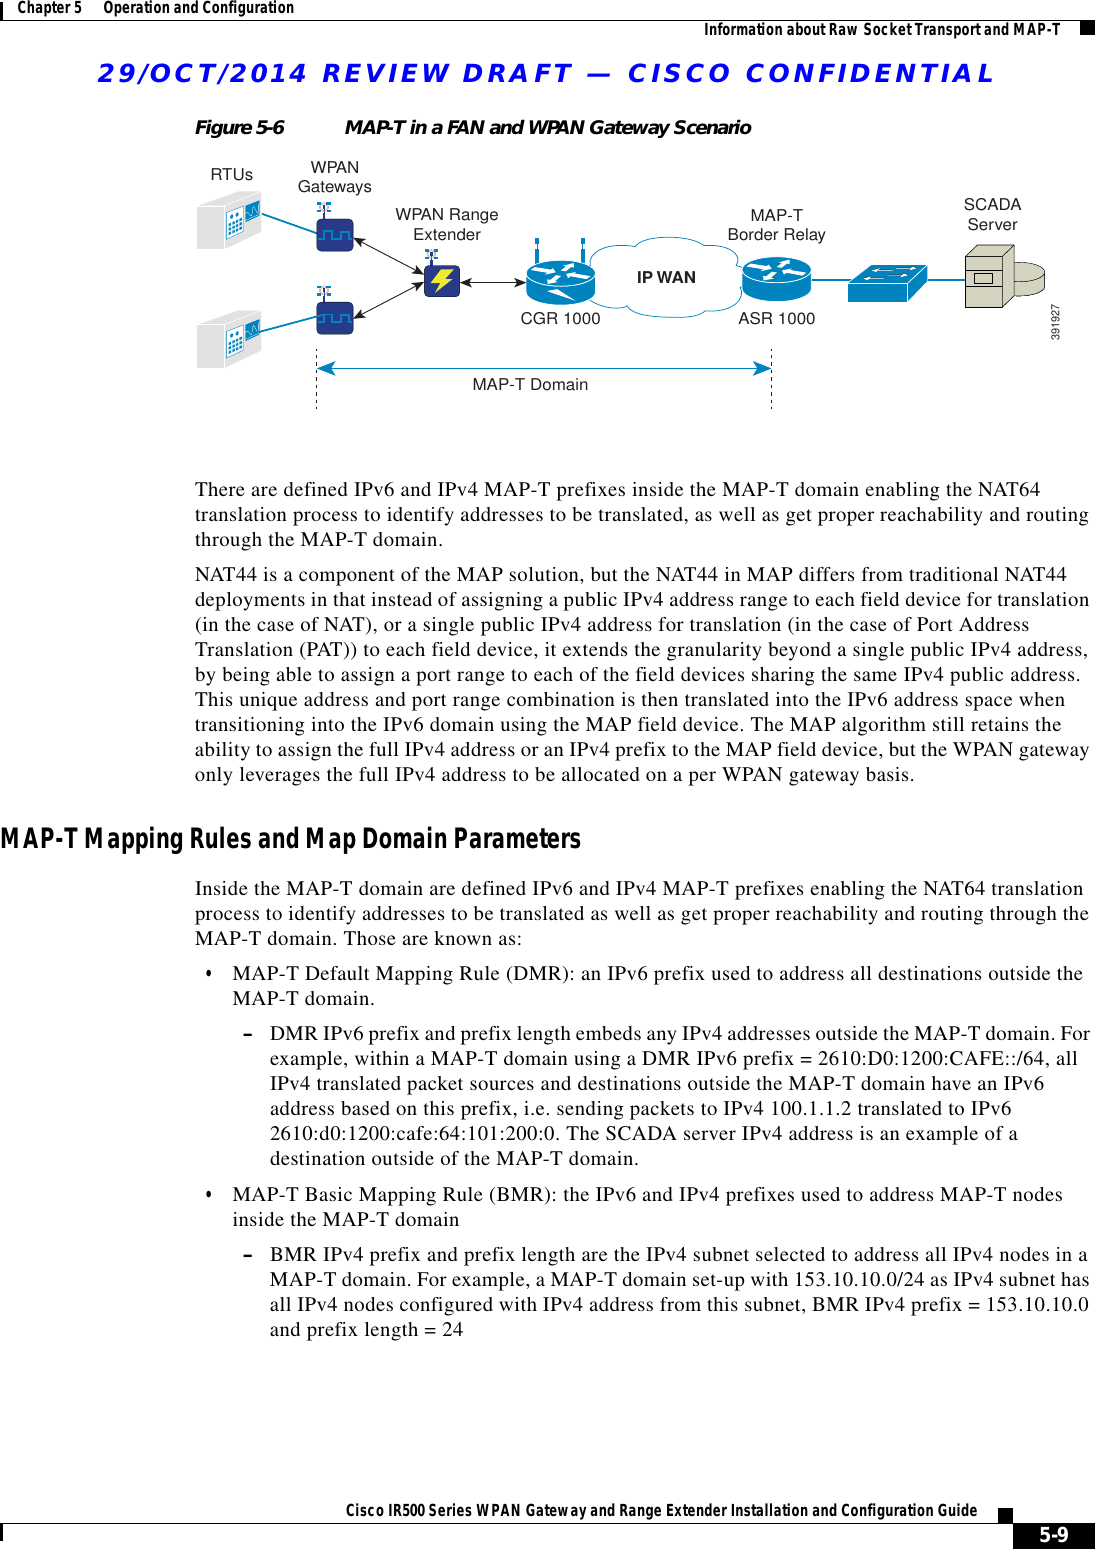 29/OCT/2014 REVIEW DRAFT — CISCO CONFIDENTIAL5-9Cisco IR500 Series WPAN Gateway and Range Extender Installation and Configuration Guide Chapter 5      Operation and Configuration Information about Raw Socket Transport and MAP-TFigure 5-6 MAP-T in a FAN and WPAN Gateway ScenarioRTUsWPAN RangeExtenderCGR 1000MAP-T DomainMAP-TBorder RelayASR 1000SCADAServerIP WAN391927WPANGatewaysThere are defined IPv6 and IPv4 MAP-T prefixes inside the MAP-T domain enabling the NAT64 translation process to identify addresses to be translated, as well as get proper reachability and routing through the MAP-T domain.NAT44 is a component of the MAP solution, but the NAT44 in MAP differs from traditional NAT44 deployments in that instead of assigning a public IPv4 address range to each field device for translation (in the case of NAT), or a single public IPv4 address for translation (in the case of Port Address Translation (PAT)) to each field device, it extends the granularity beyond a single public IPv4 address, by being able to assign a port range to each of the field devices sharing the same IPv4 public address. This unique address and port range combination is then translated into the IPv6 address space when transitioning into the IPv6 domain using the MAP field device. The MAP algorithm still retains the ability to assign the full IPv4 address or an IPv4 prefix to the MAP field device, but the WPAN gateway only leverages the full IPv4 address to be allocated on a per WPAN gateway basis.MAP-T Mapping Rules and Map Domain ParametersInside the MAP-T domain are defined IPv6 and IPv4 MAP-T prefixes enabling the NAT64 translation process to identify addresses to be translated as well as get proper reachability and routing through the MAP-T domain. Those are known as:  • MAP-T Default Mapping Rule (DMR): an IPv6 prefix used to address all destinations outside the MAP-T domain.  –DMR IPv6 prefix and prefix length embeds any IPv4 addresses outside the MAP-T domain. For example, within a MAP-T domain using a DMR IPv6 prefix = 2610:D0:1200:CAFE::/64, all IPv4 translated packet sources and destinations outside the MAP-T domain have an IPv6 address based on this prefix, i.e. sending packets to IPv4 100.1.1.2 translated to IPv6 2610:d0:1200:cafe:64:101:200:0. The SCADA server IPv4 address is an example of a destination outside of the MAP-T domain.  • MAP-T Basic Mapping Rule (BMR): the IPv6 and IPv4 prefixes used to address MAP-T nodes inside the MAP-T domain –BMR IPv4 prefix and prefix length are the IPv4 subnet selected to address all IPv4 nodes in a MAP-T domain. For example, a MAP-T domain set-up with 153.10.10.0/24 as IPv4 subnet has all IPv4 nodes configured with IPv4 address from this subnet, BMR IPv4 prefix = 153.10.10.0 and prefix length = 24